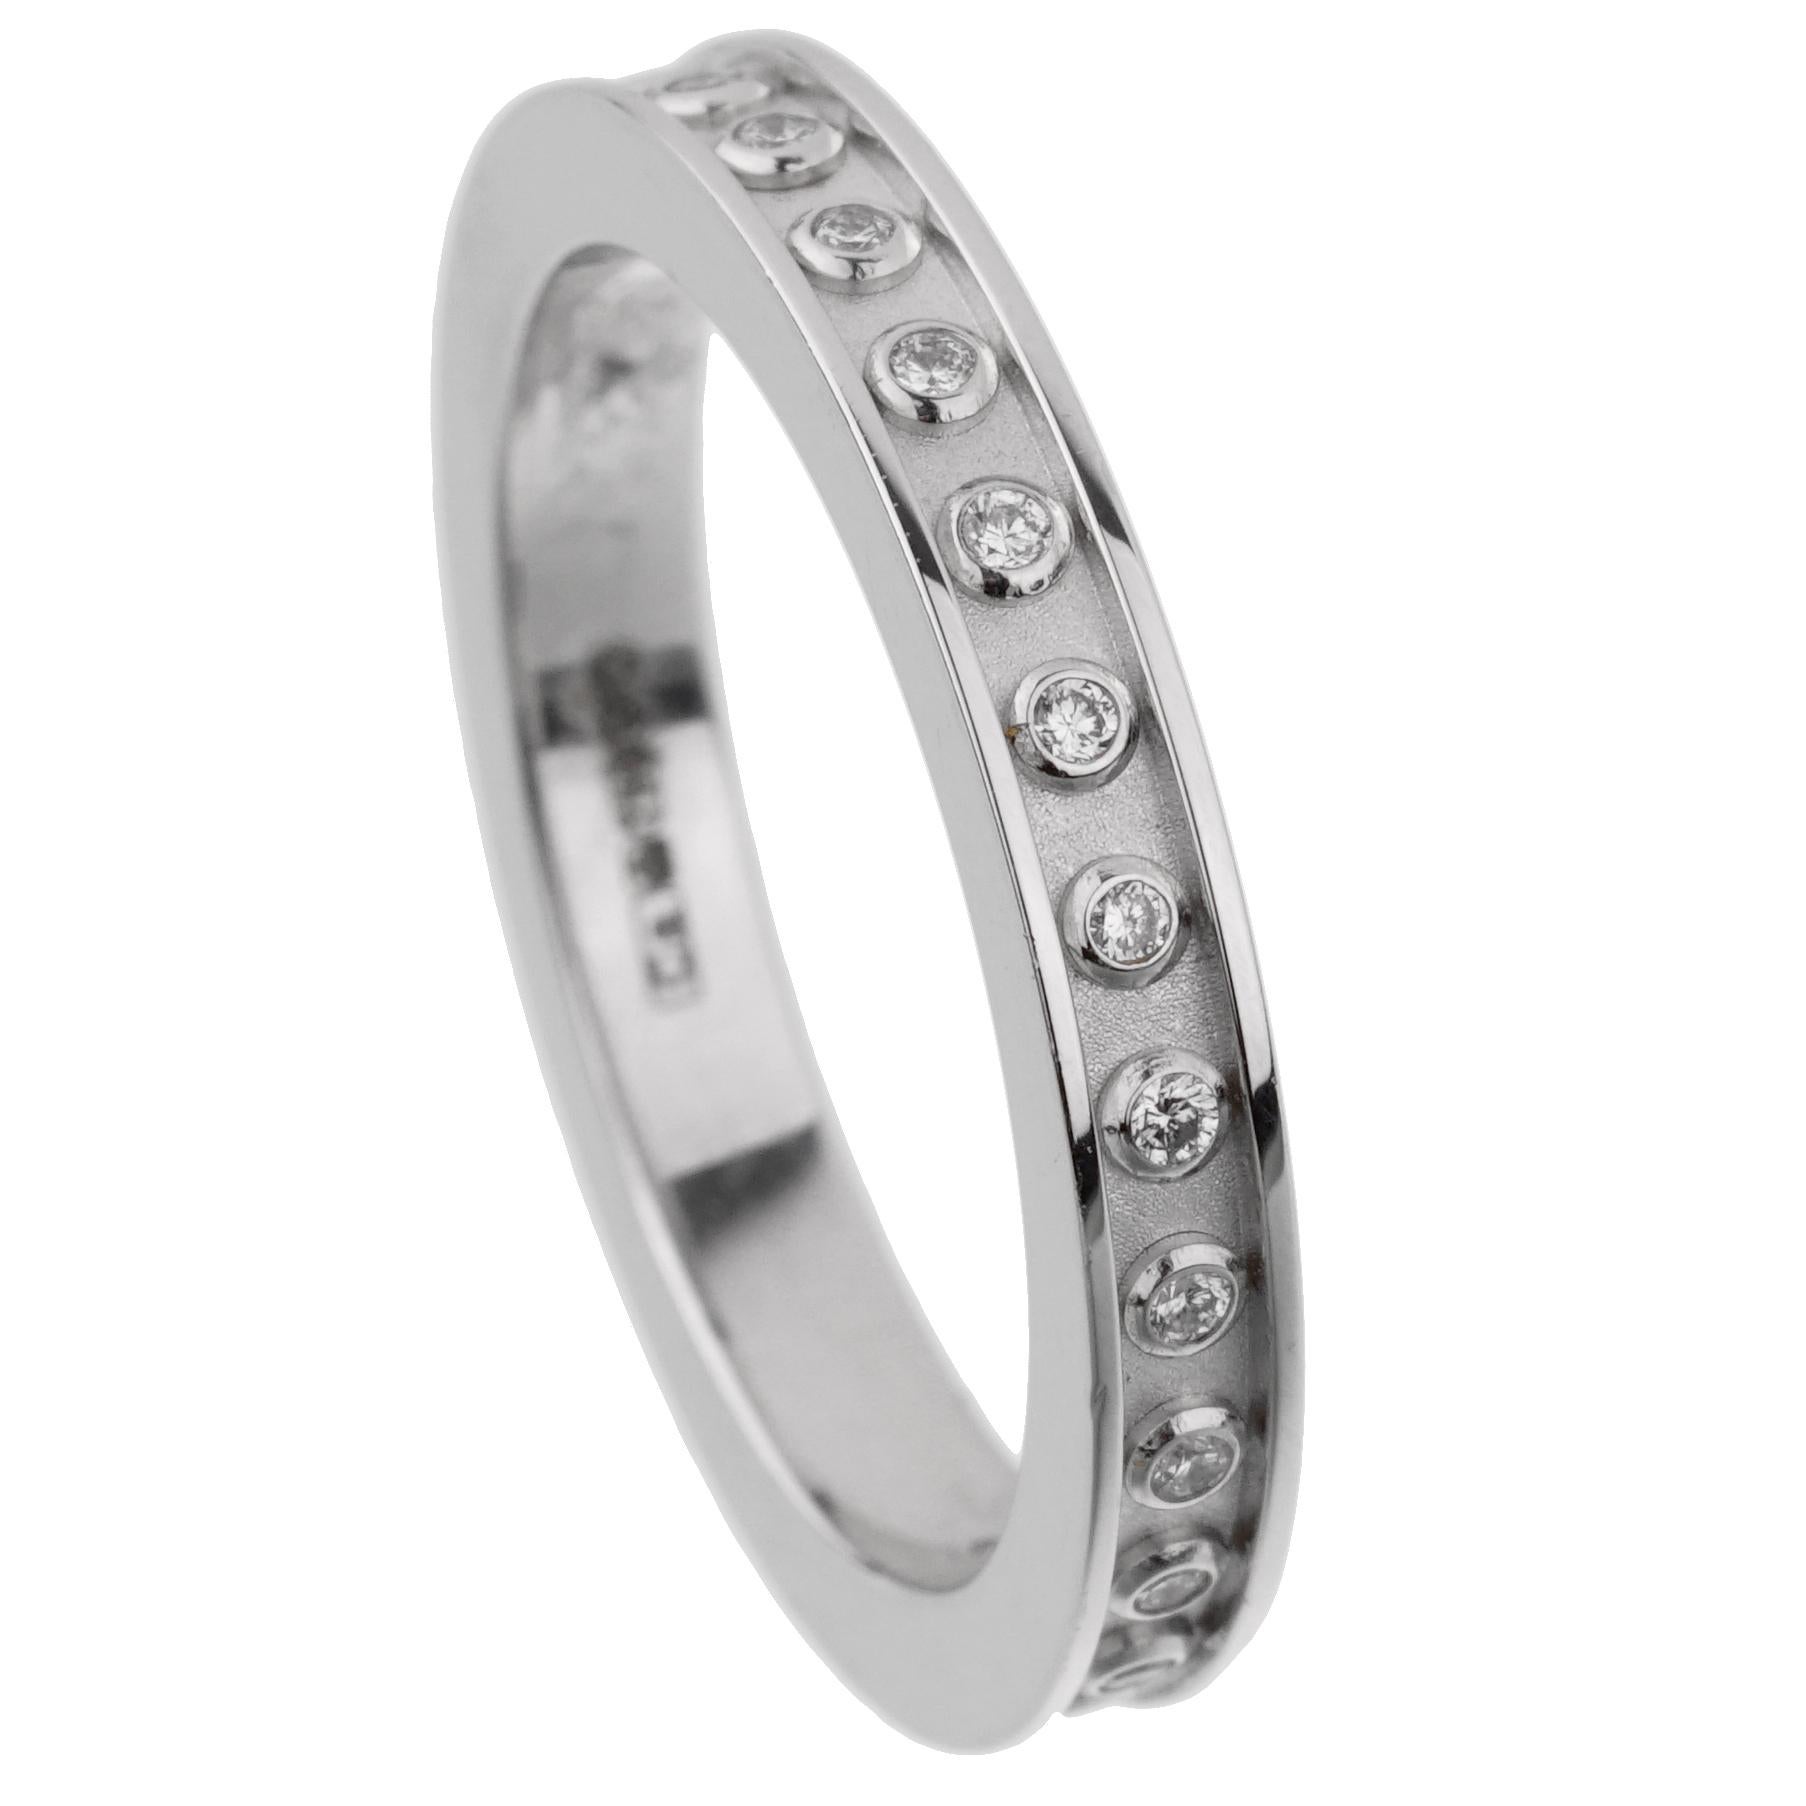 A chic diamond ring by Carrera Y Carrera showcasing round brilliant cut diamonds encircling the entire band. The ring measures a size 7 and has a total weight of .18ct of the finest diamonds.